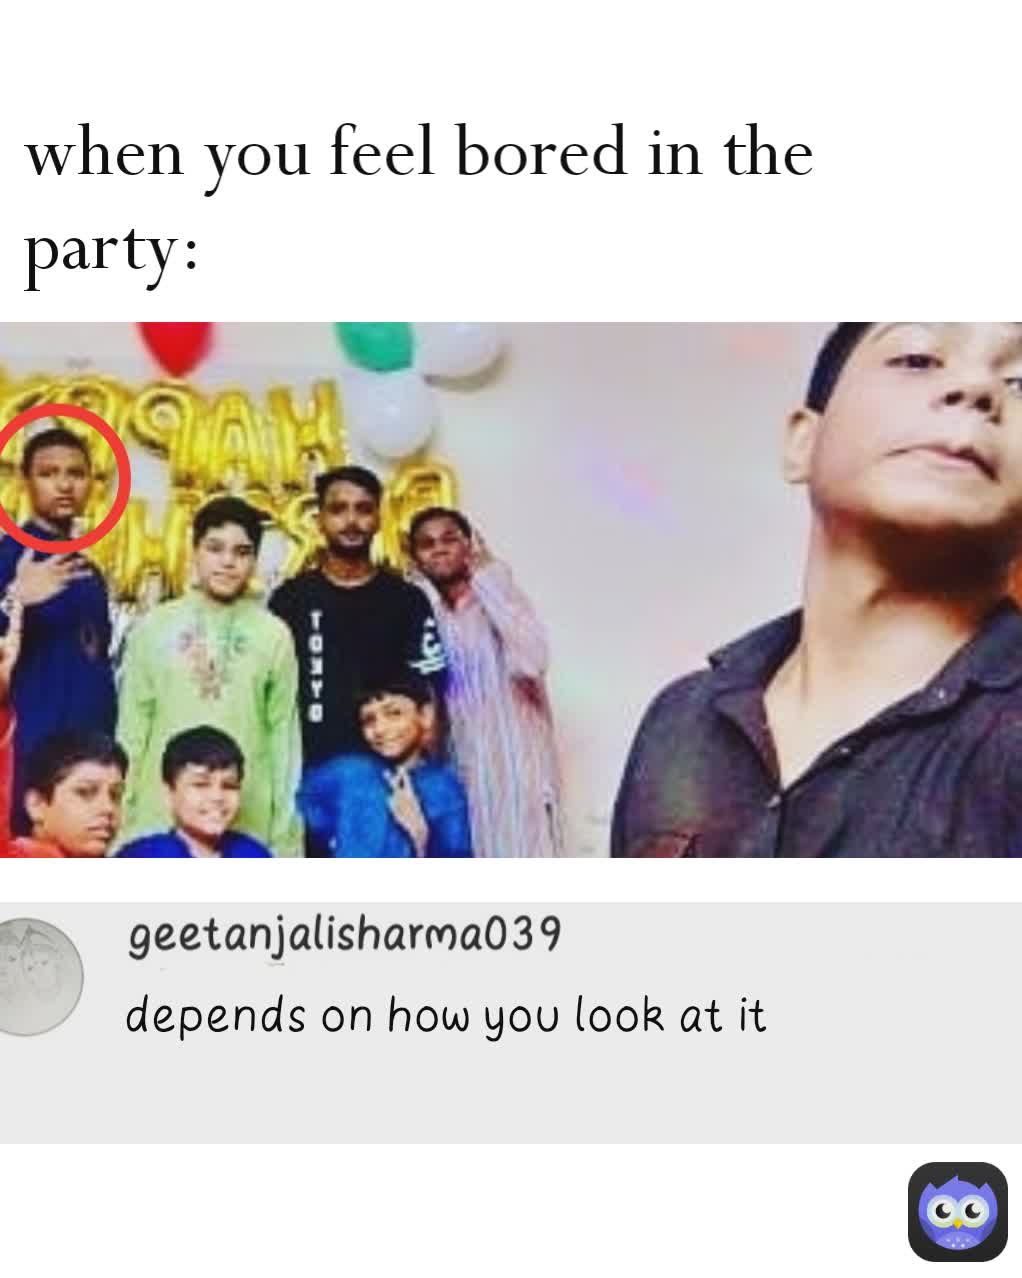 when you feel bored in the party: depends on how you look at it